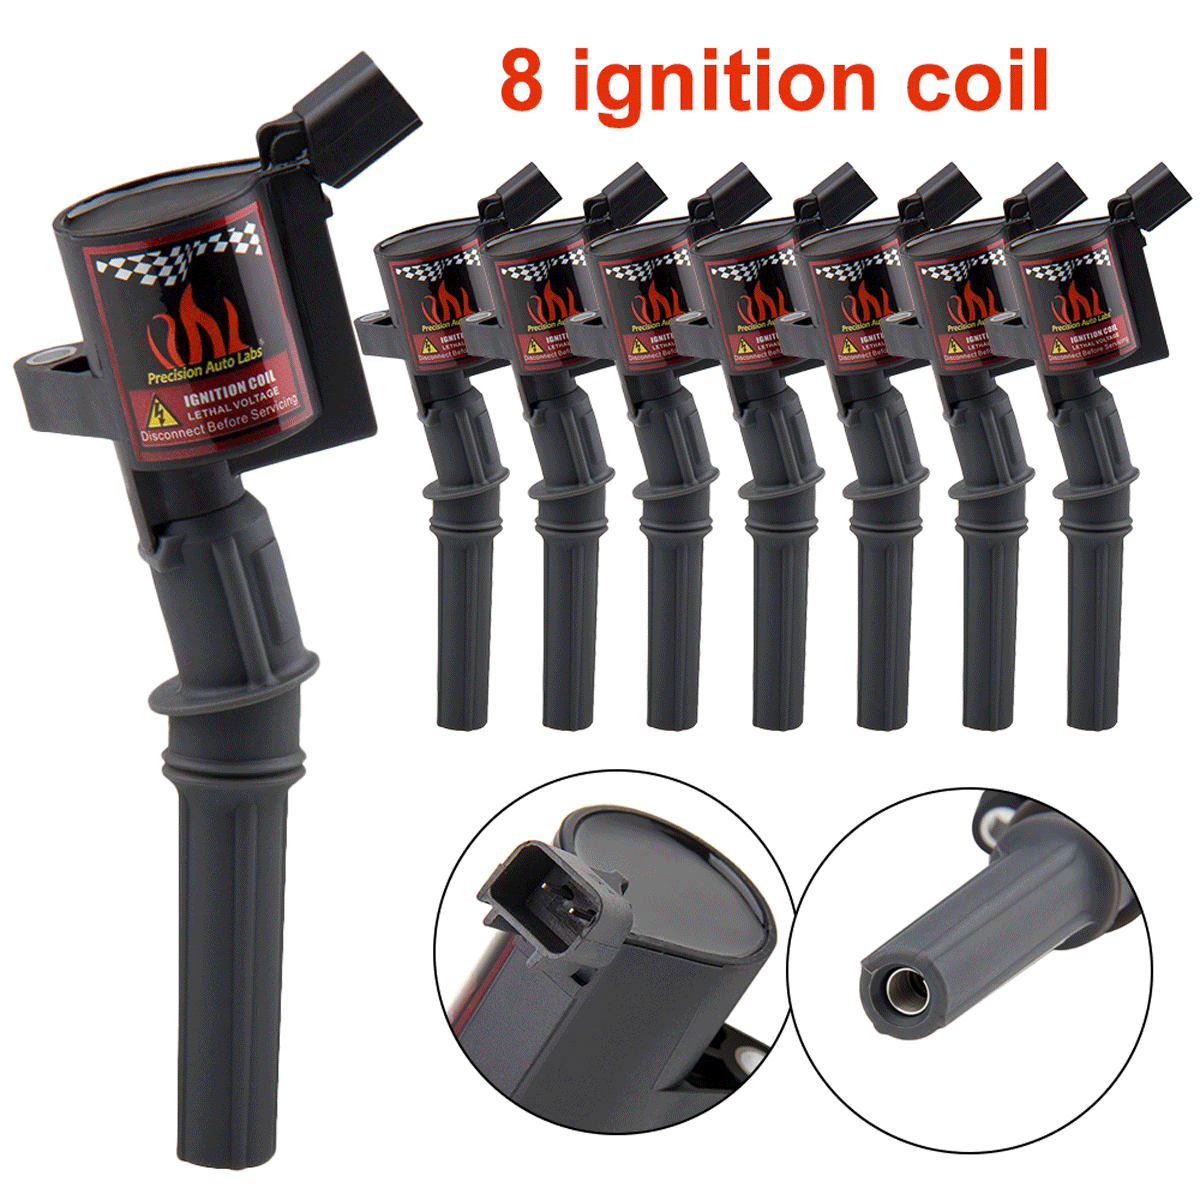 Ignition Coil Pack Set of 8 DG508 fit for Ford 4.6L 5.4L V8 DG457 DG472 DG491 CROWN VICTORIA EXPEDITION F-150 F-250 F-350 F-450 MUSTANG THUNDERBIRD LINCOLN MERCURY EXPLORER 3W7Z-12029-AA